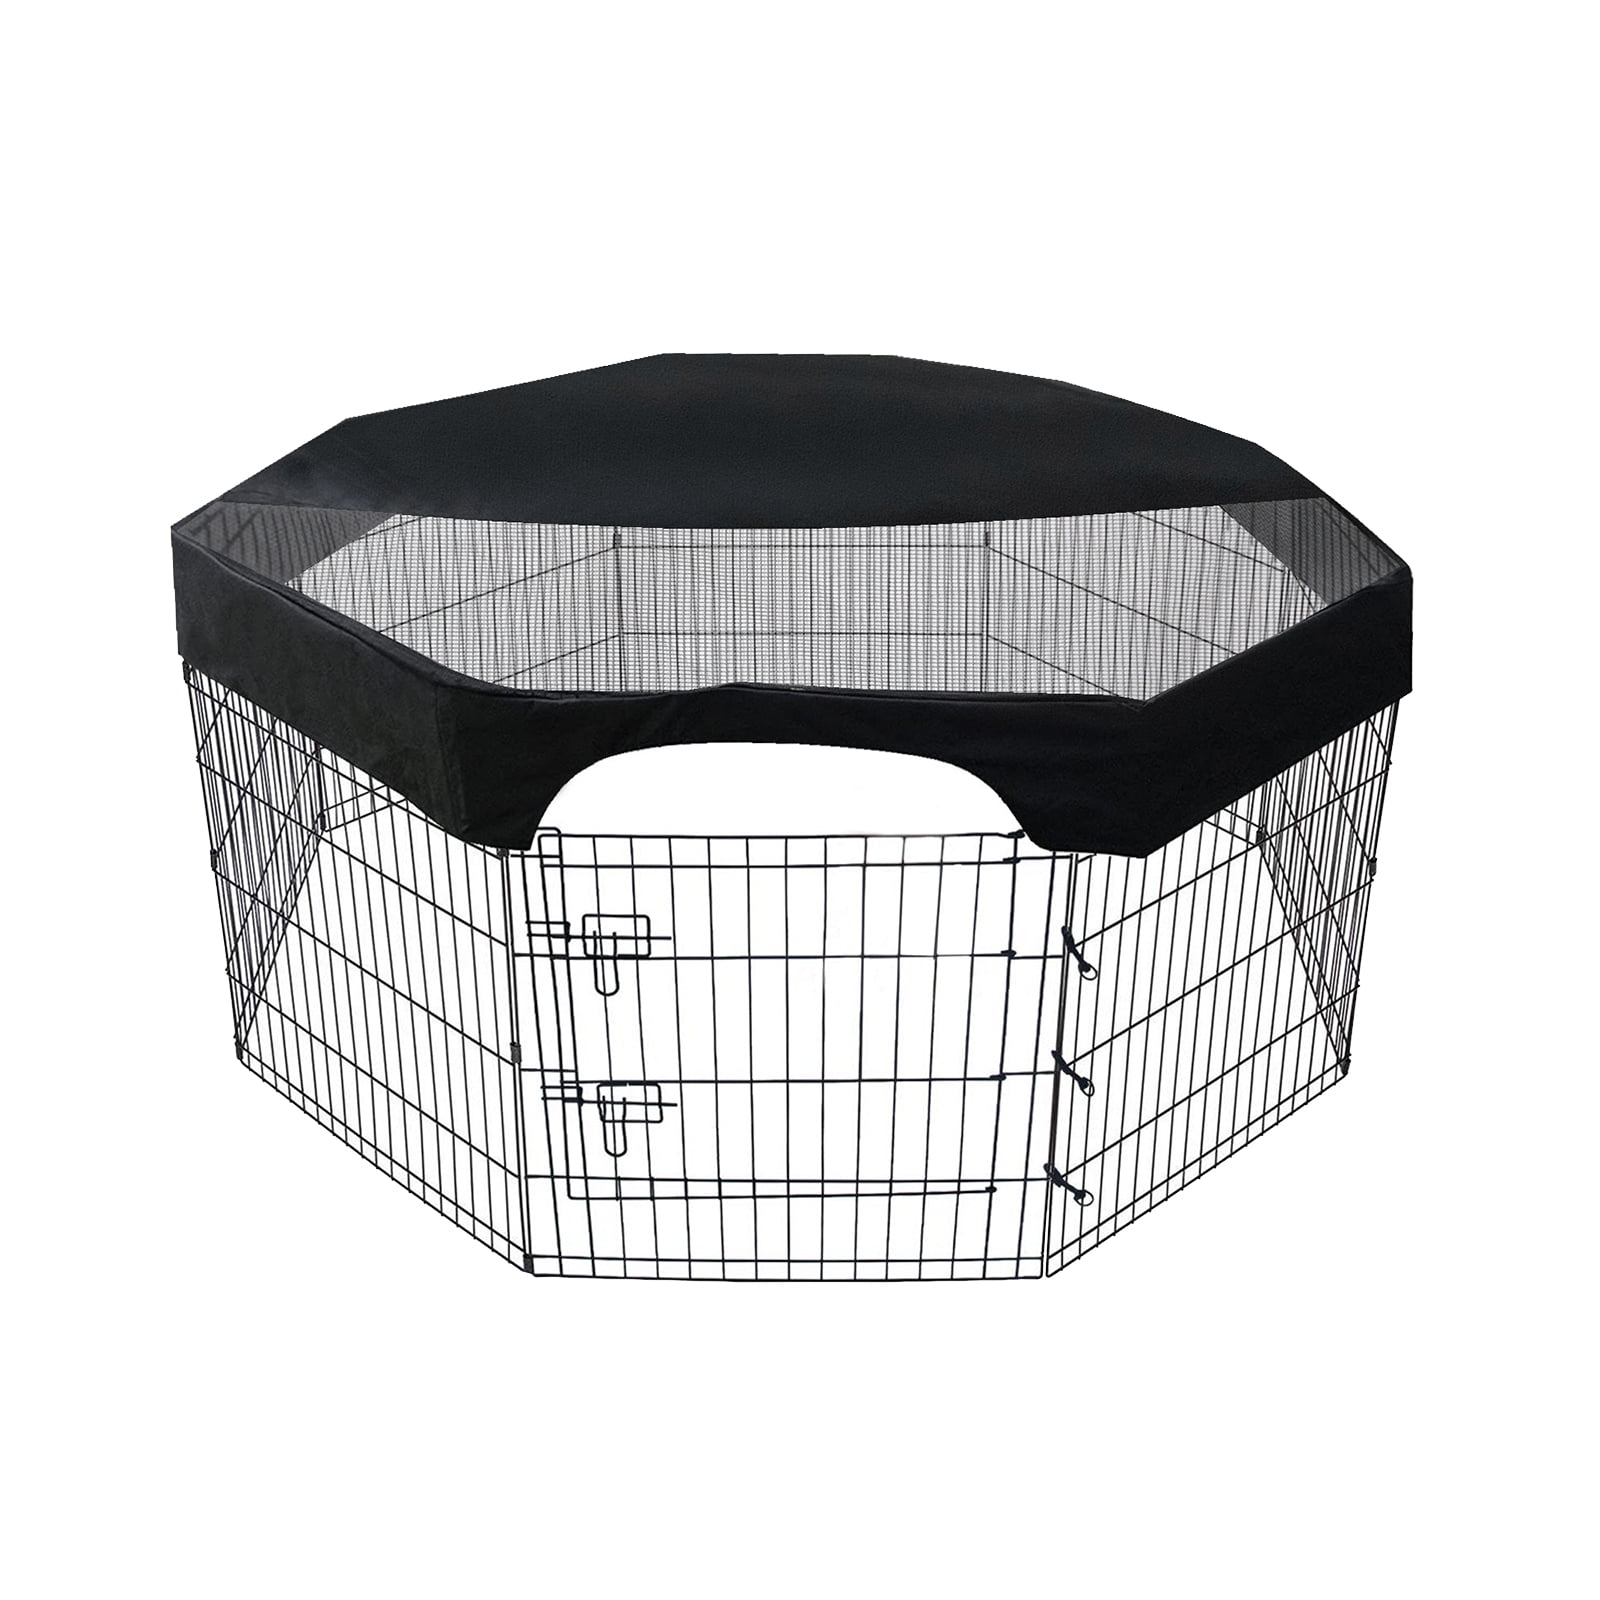 Provide Shade and Secuirty Outdoor Indoor Pet Playpen Cover 6 Pannel Sun Rain Proof Cover Black Mesh Dog Pen Cover Fits All 24 Inch 6 Panels Dog Exercise Playpen-Pen NOT Included 